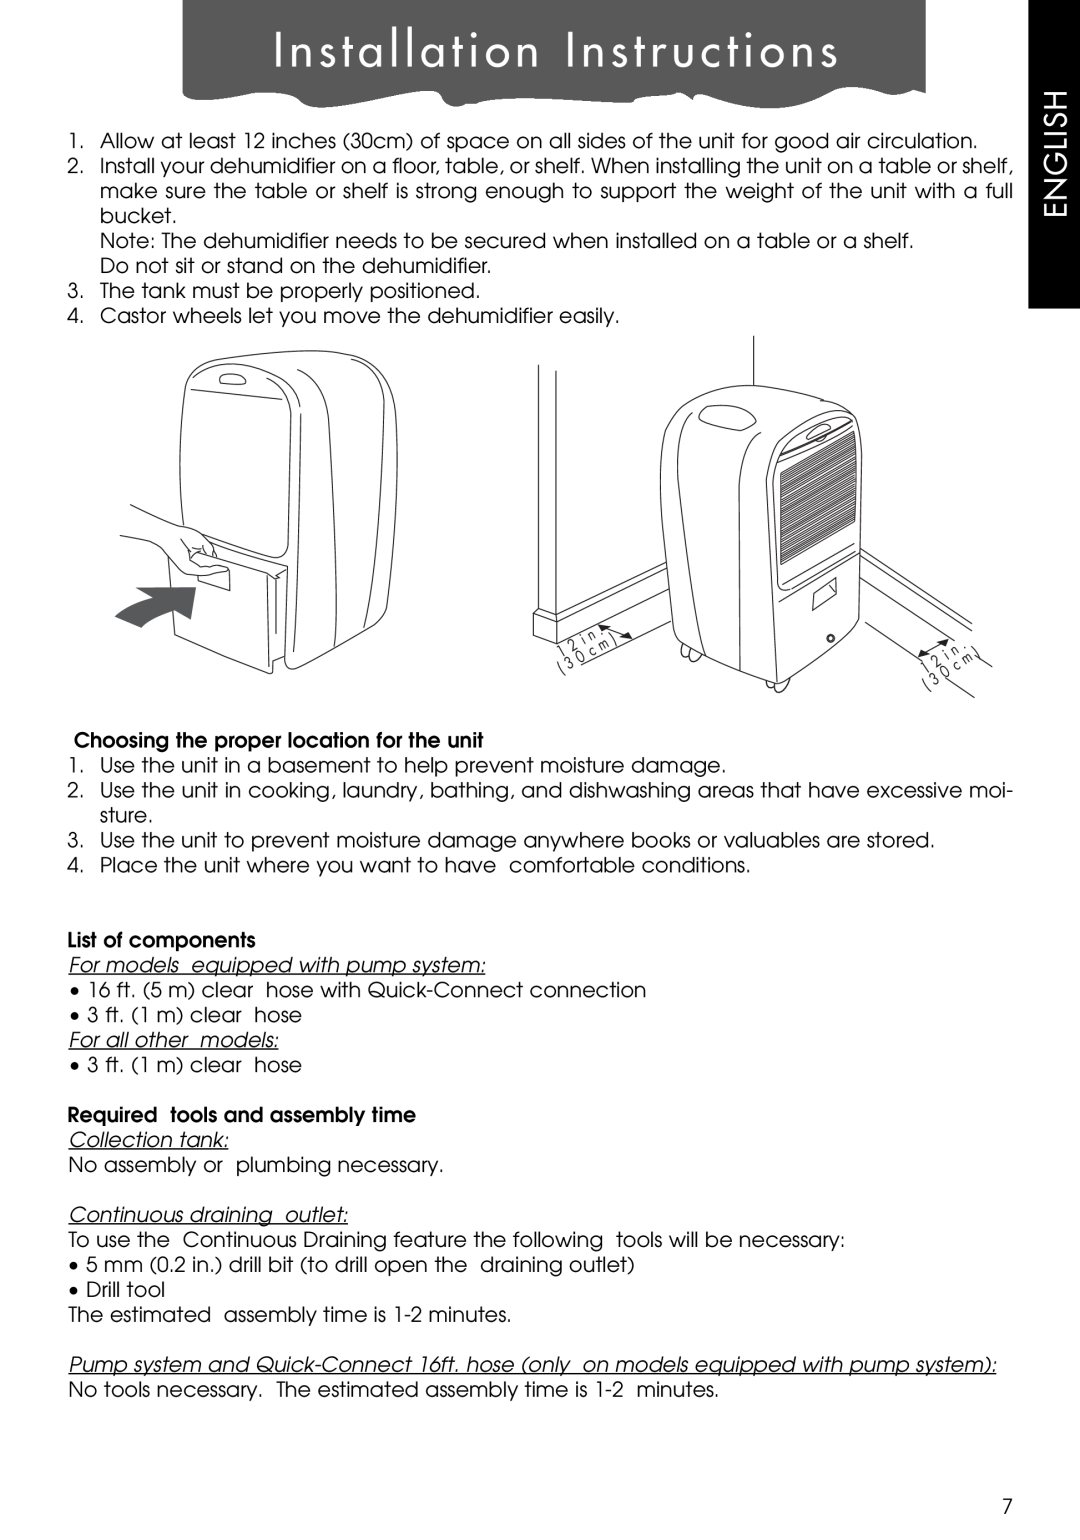 DeLonghi DE650P, DE300P Installation Instructions, English, For models equipped with pump system, For all other models 